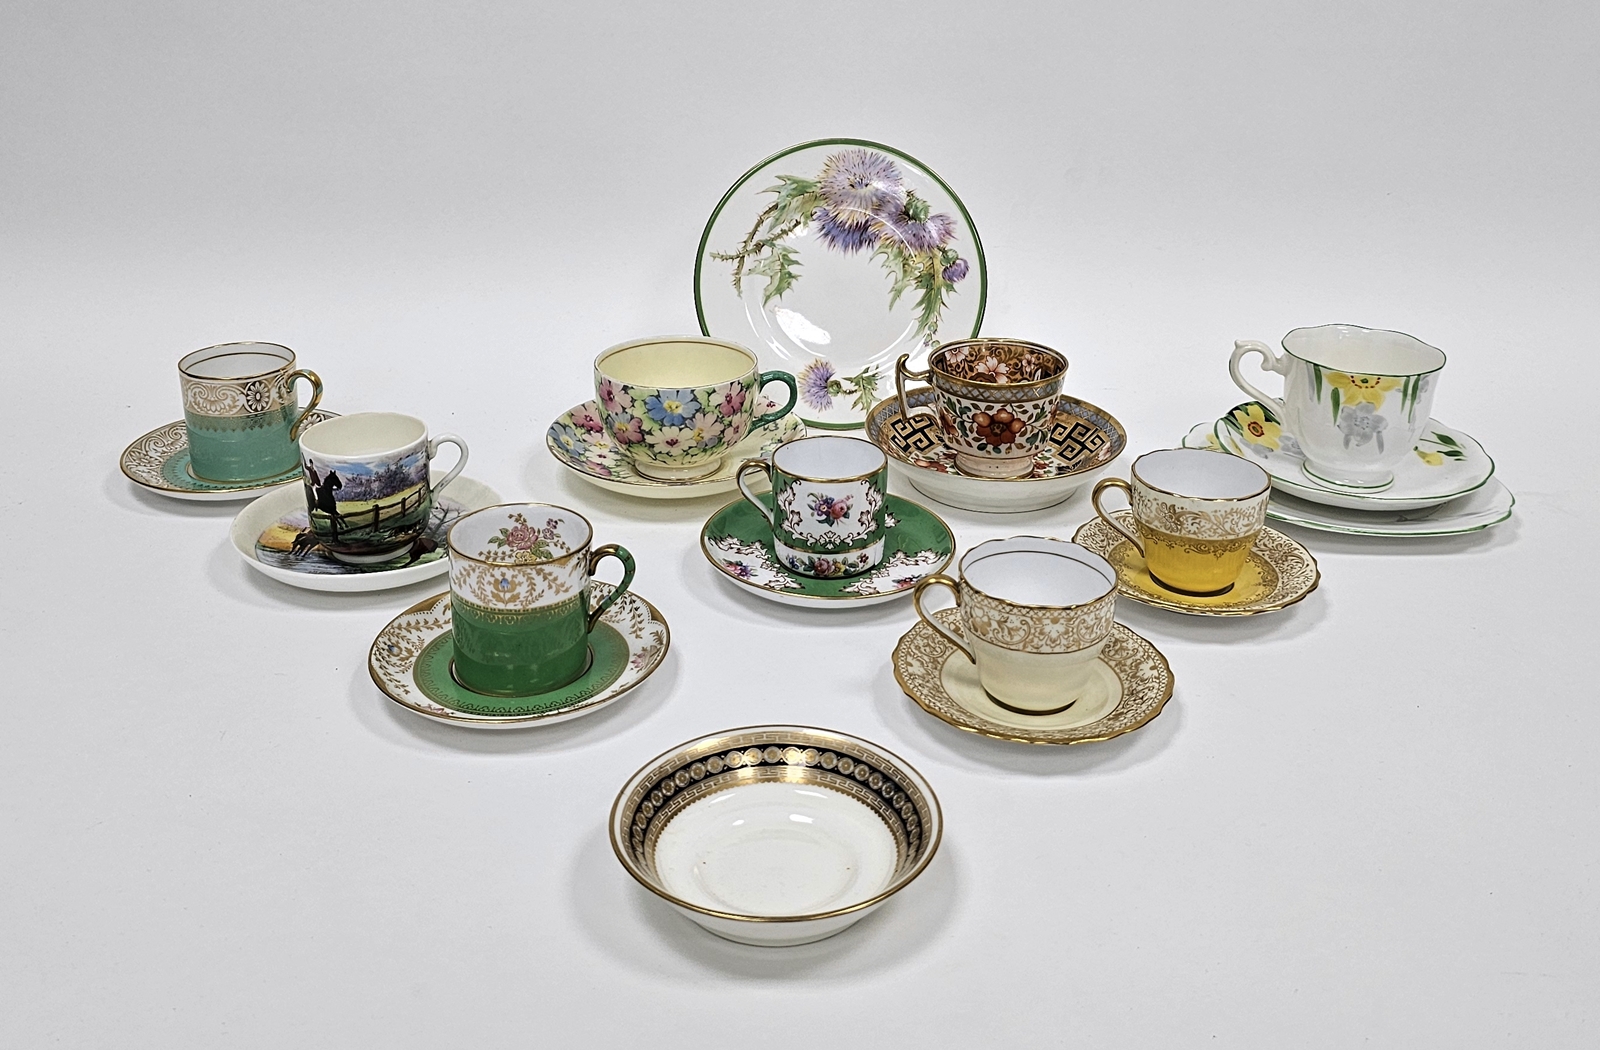 Collection of English porcelain and bone china cups and saucers including an early 19th century